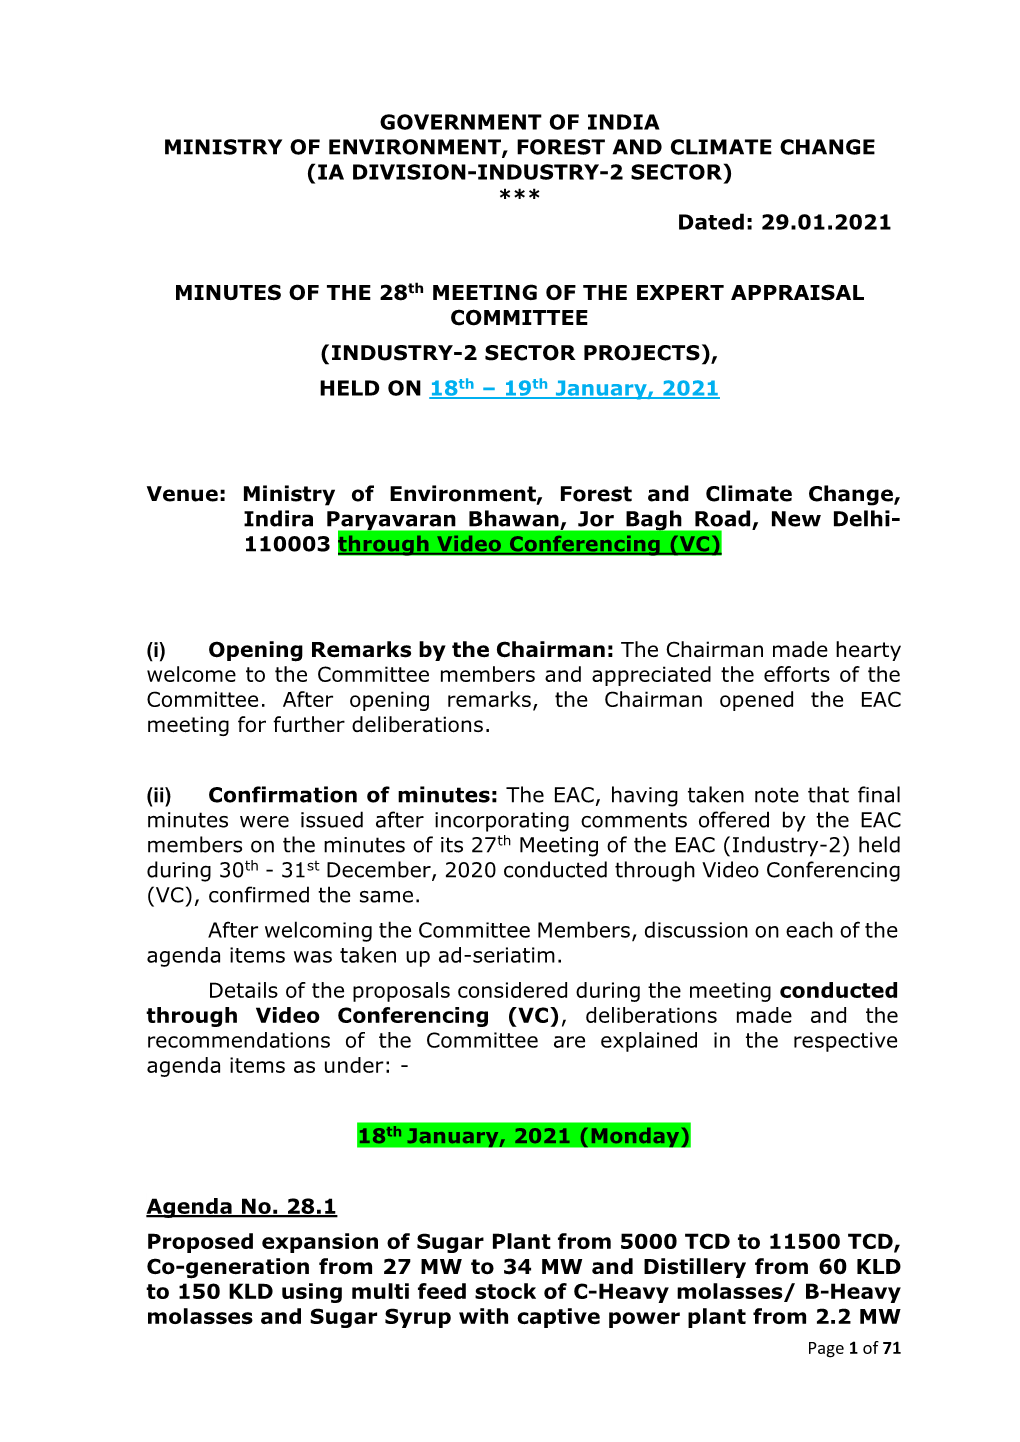 GOVERNMENT of INDIA MINISTRY of ENVIRONMENT, FOREST and CLIMATE CHANGE (IA DIVISION-INDUSTRY-2 SECTOR) *** Dated: 29.01.2021